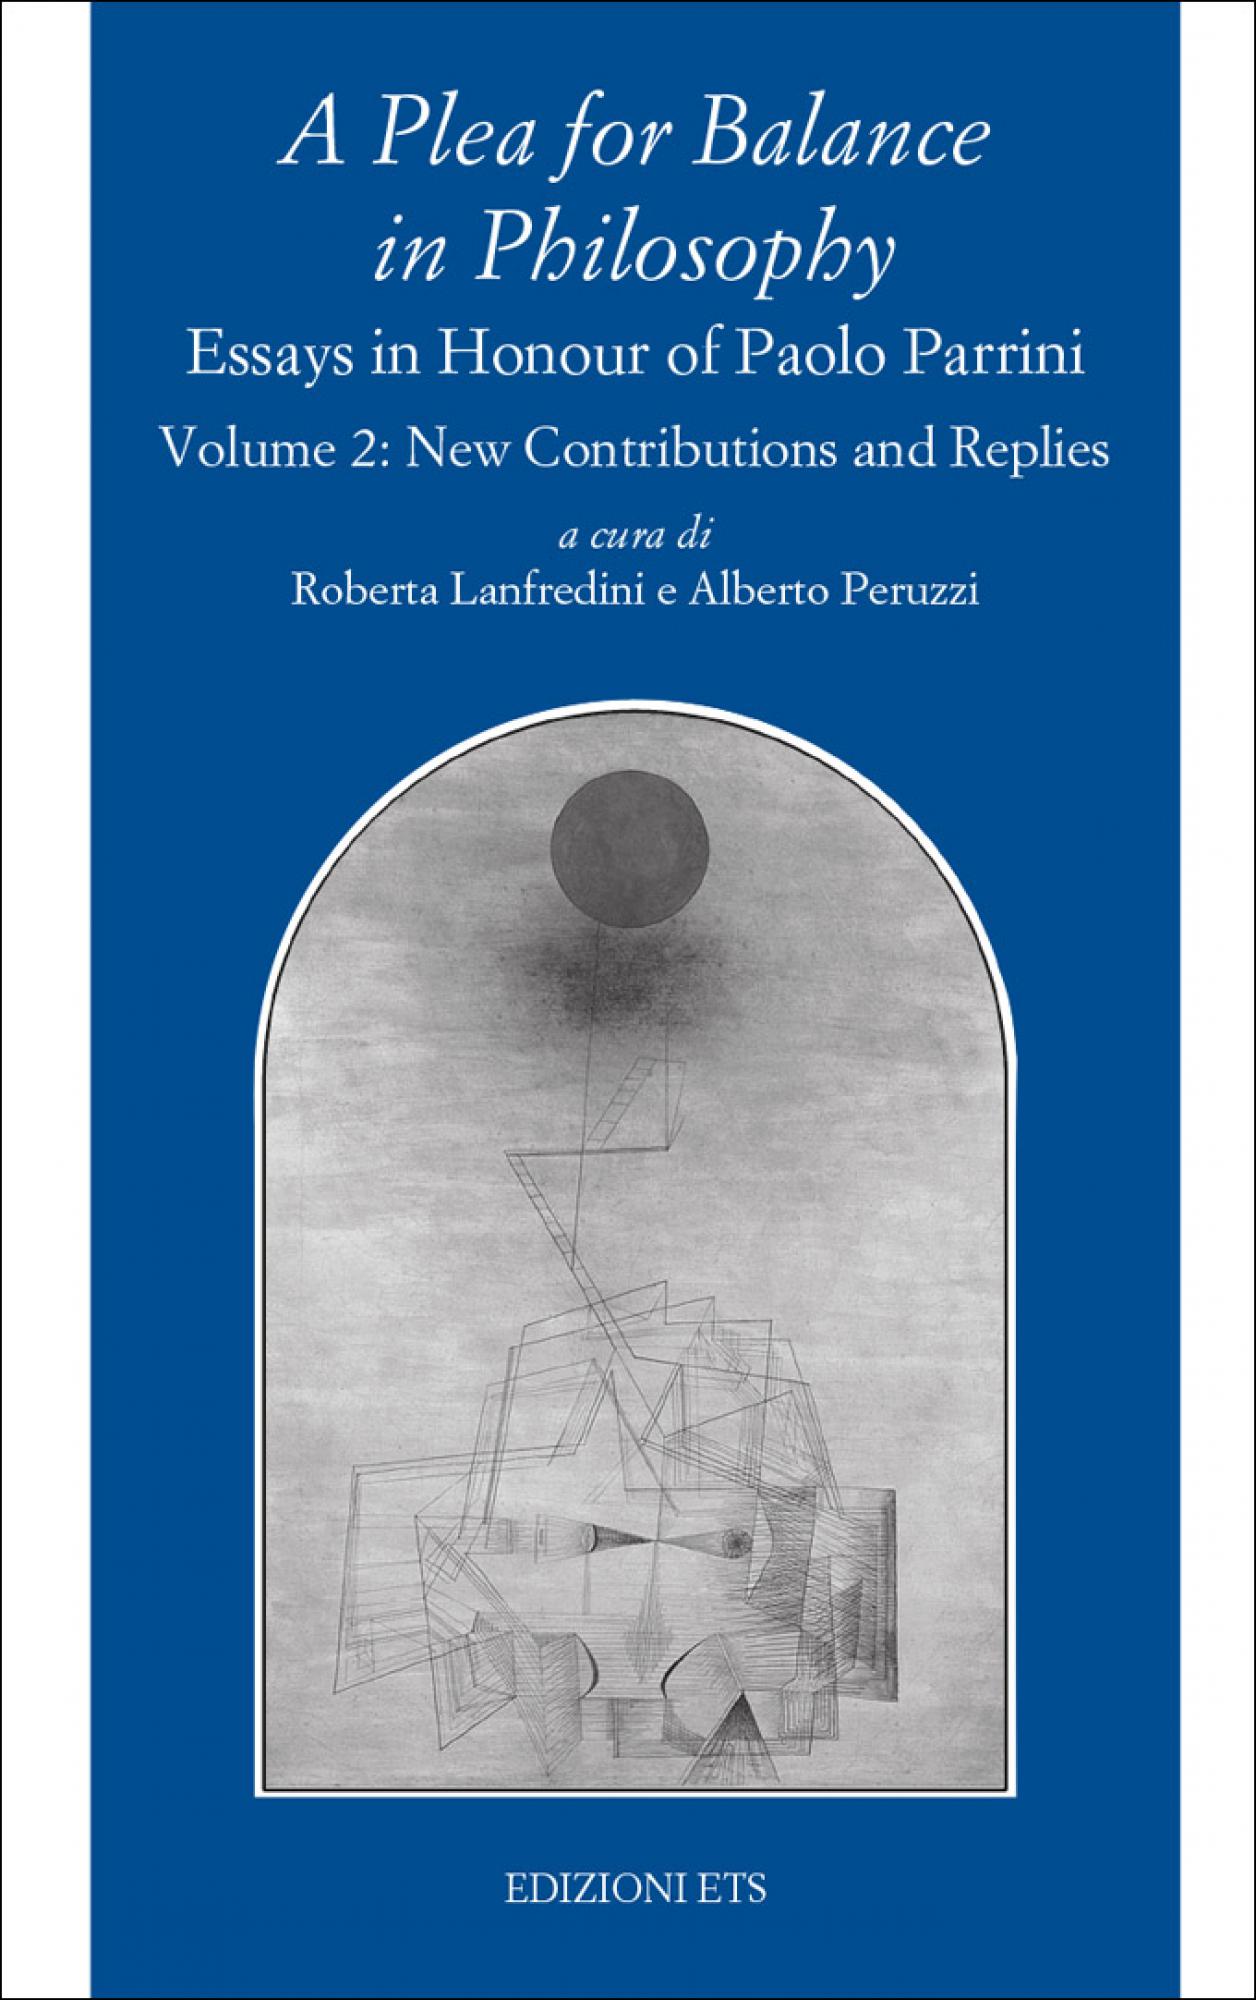 A Plea for Balance in Philosophy.Essays in Honour of Paolo Parrini – Volume 2: New Contributions and Replies